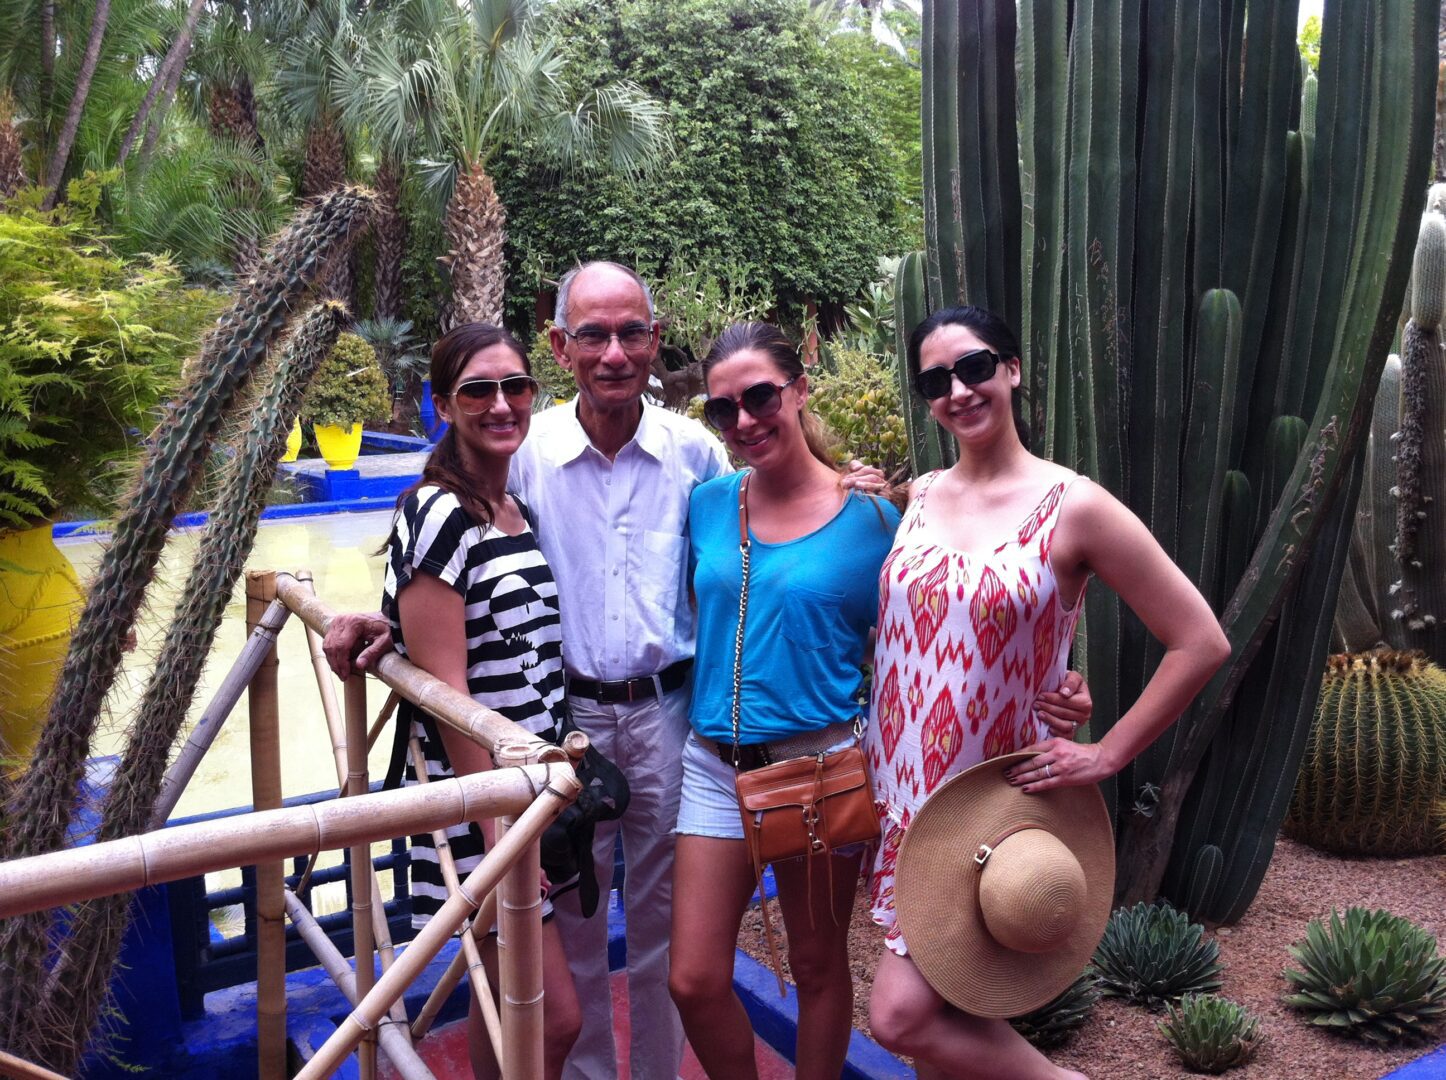 My dad, sisters and me on a family vacay in Morocco last summer